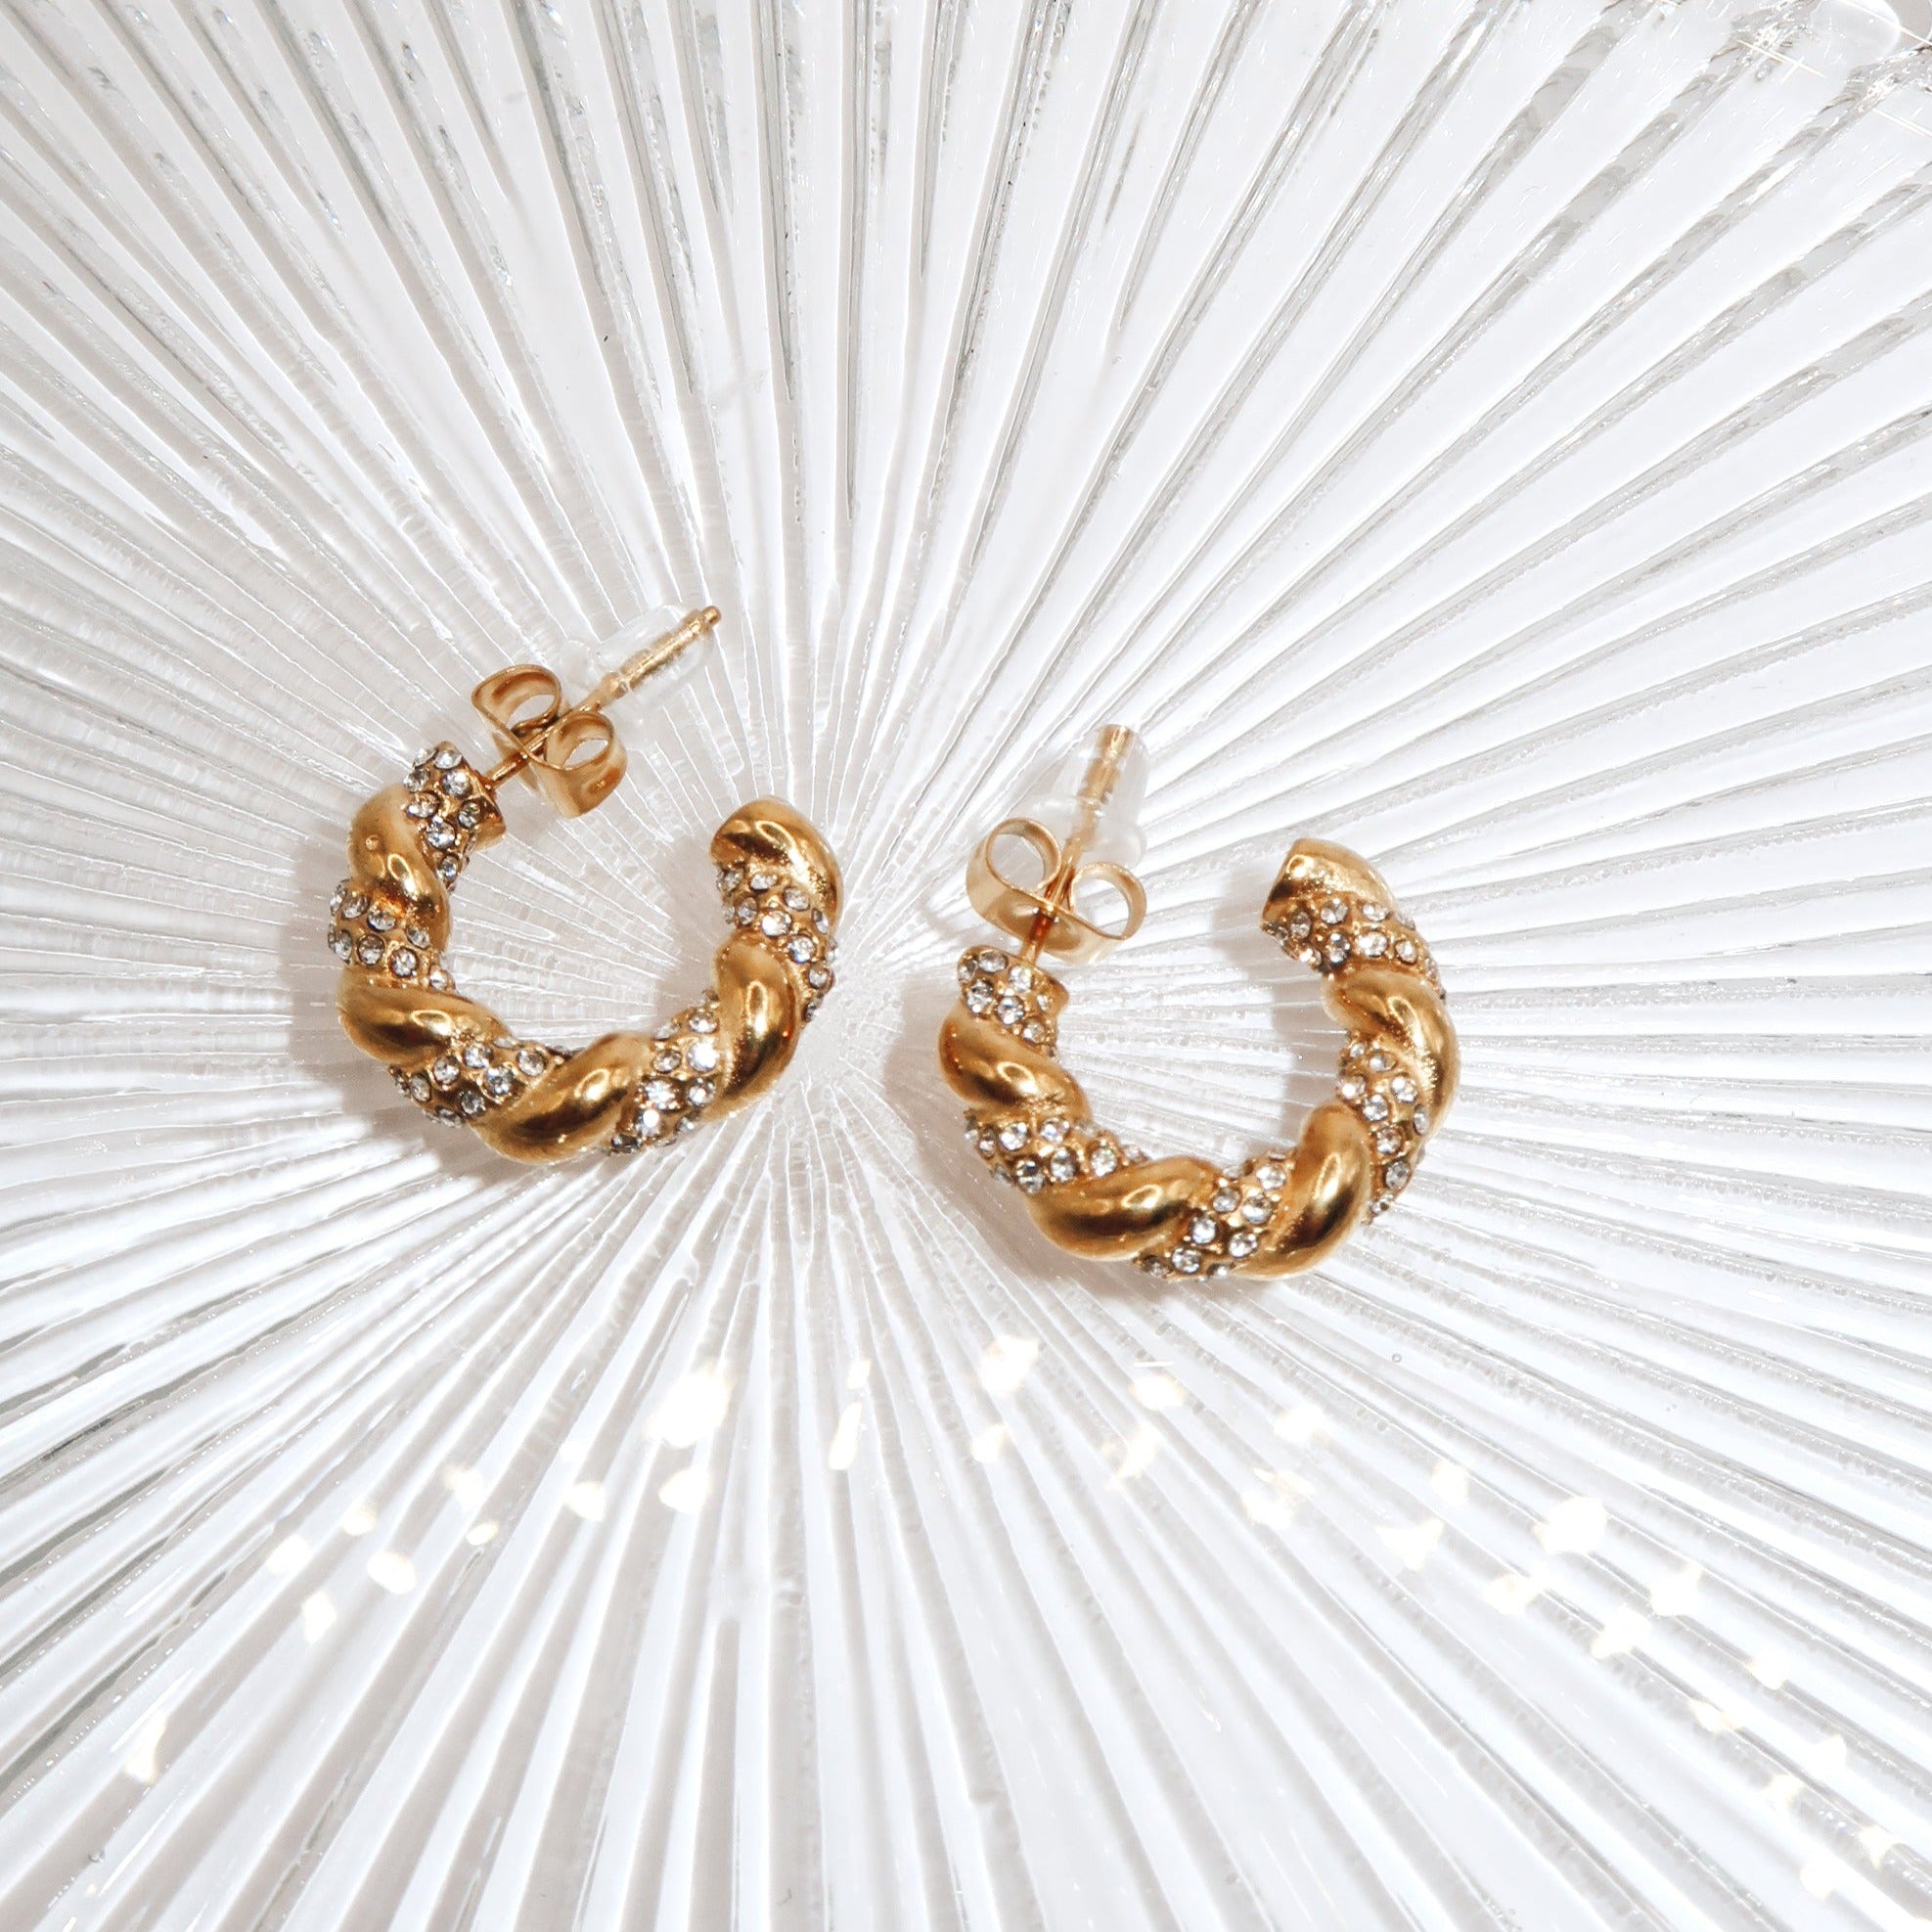 JOSIE - 18K PVD Gold Plated Small Twisted Hoop Earrings with CZ Stones - Mixed Metals